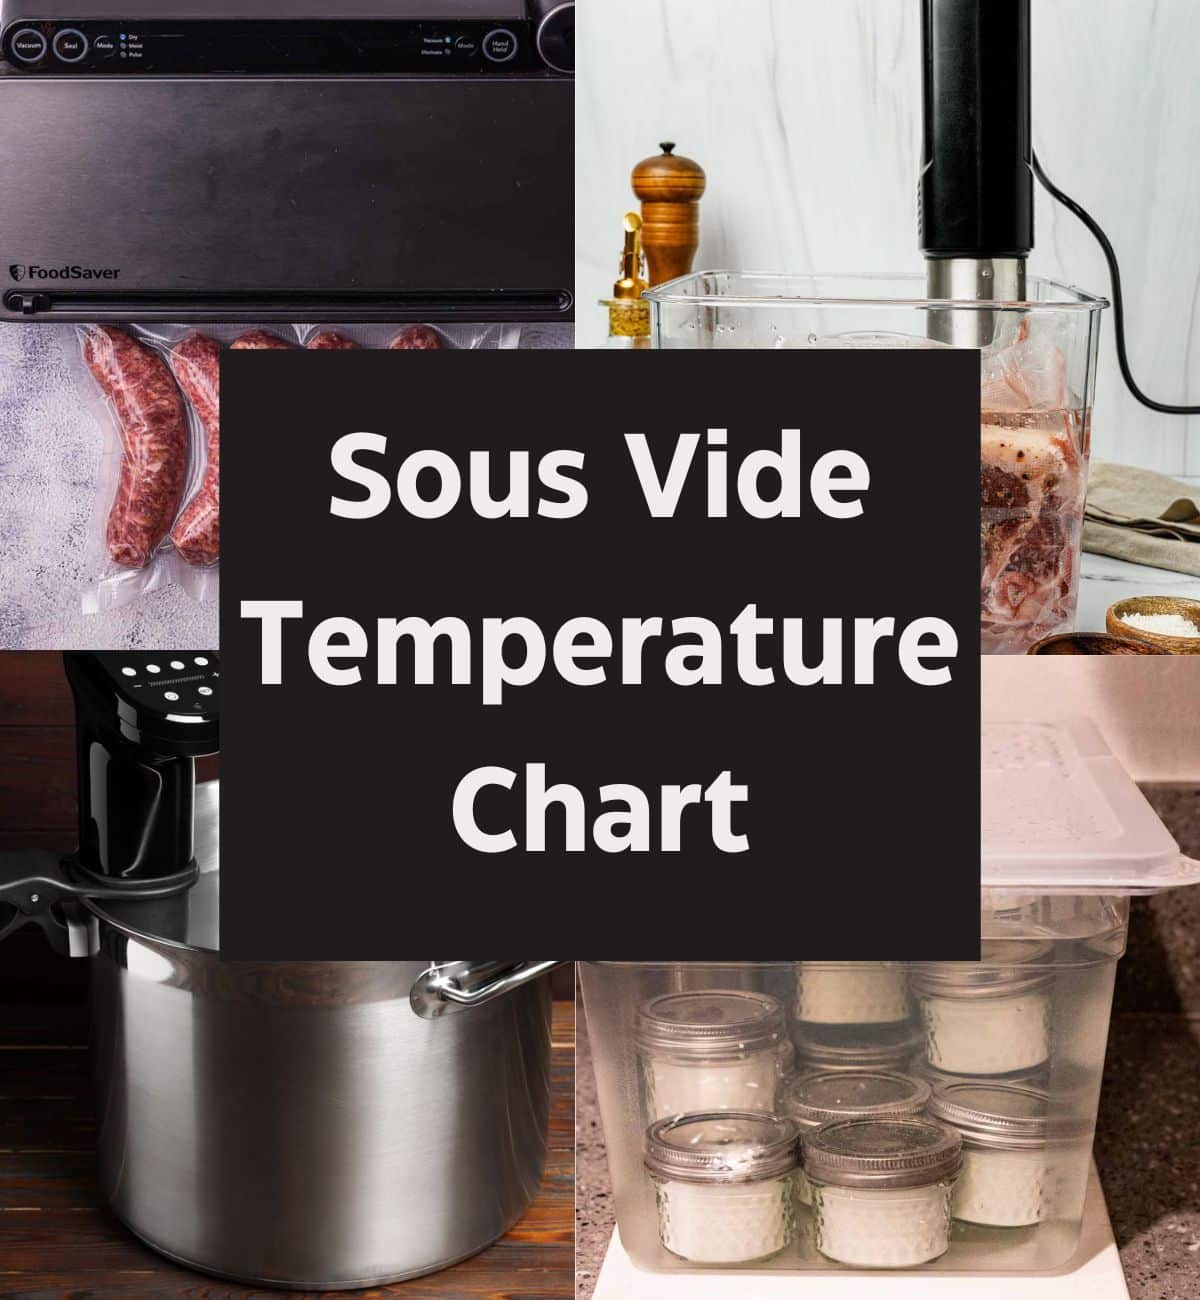 Sous-vide cooking made easy - look up cooking times!